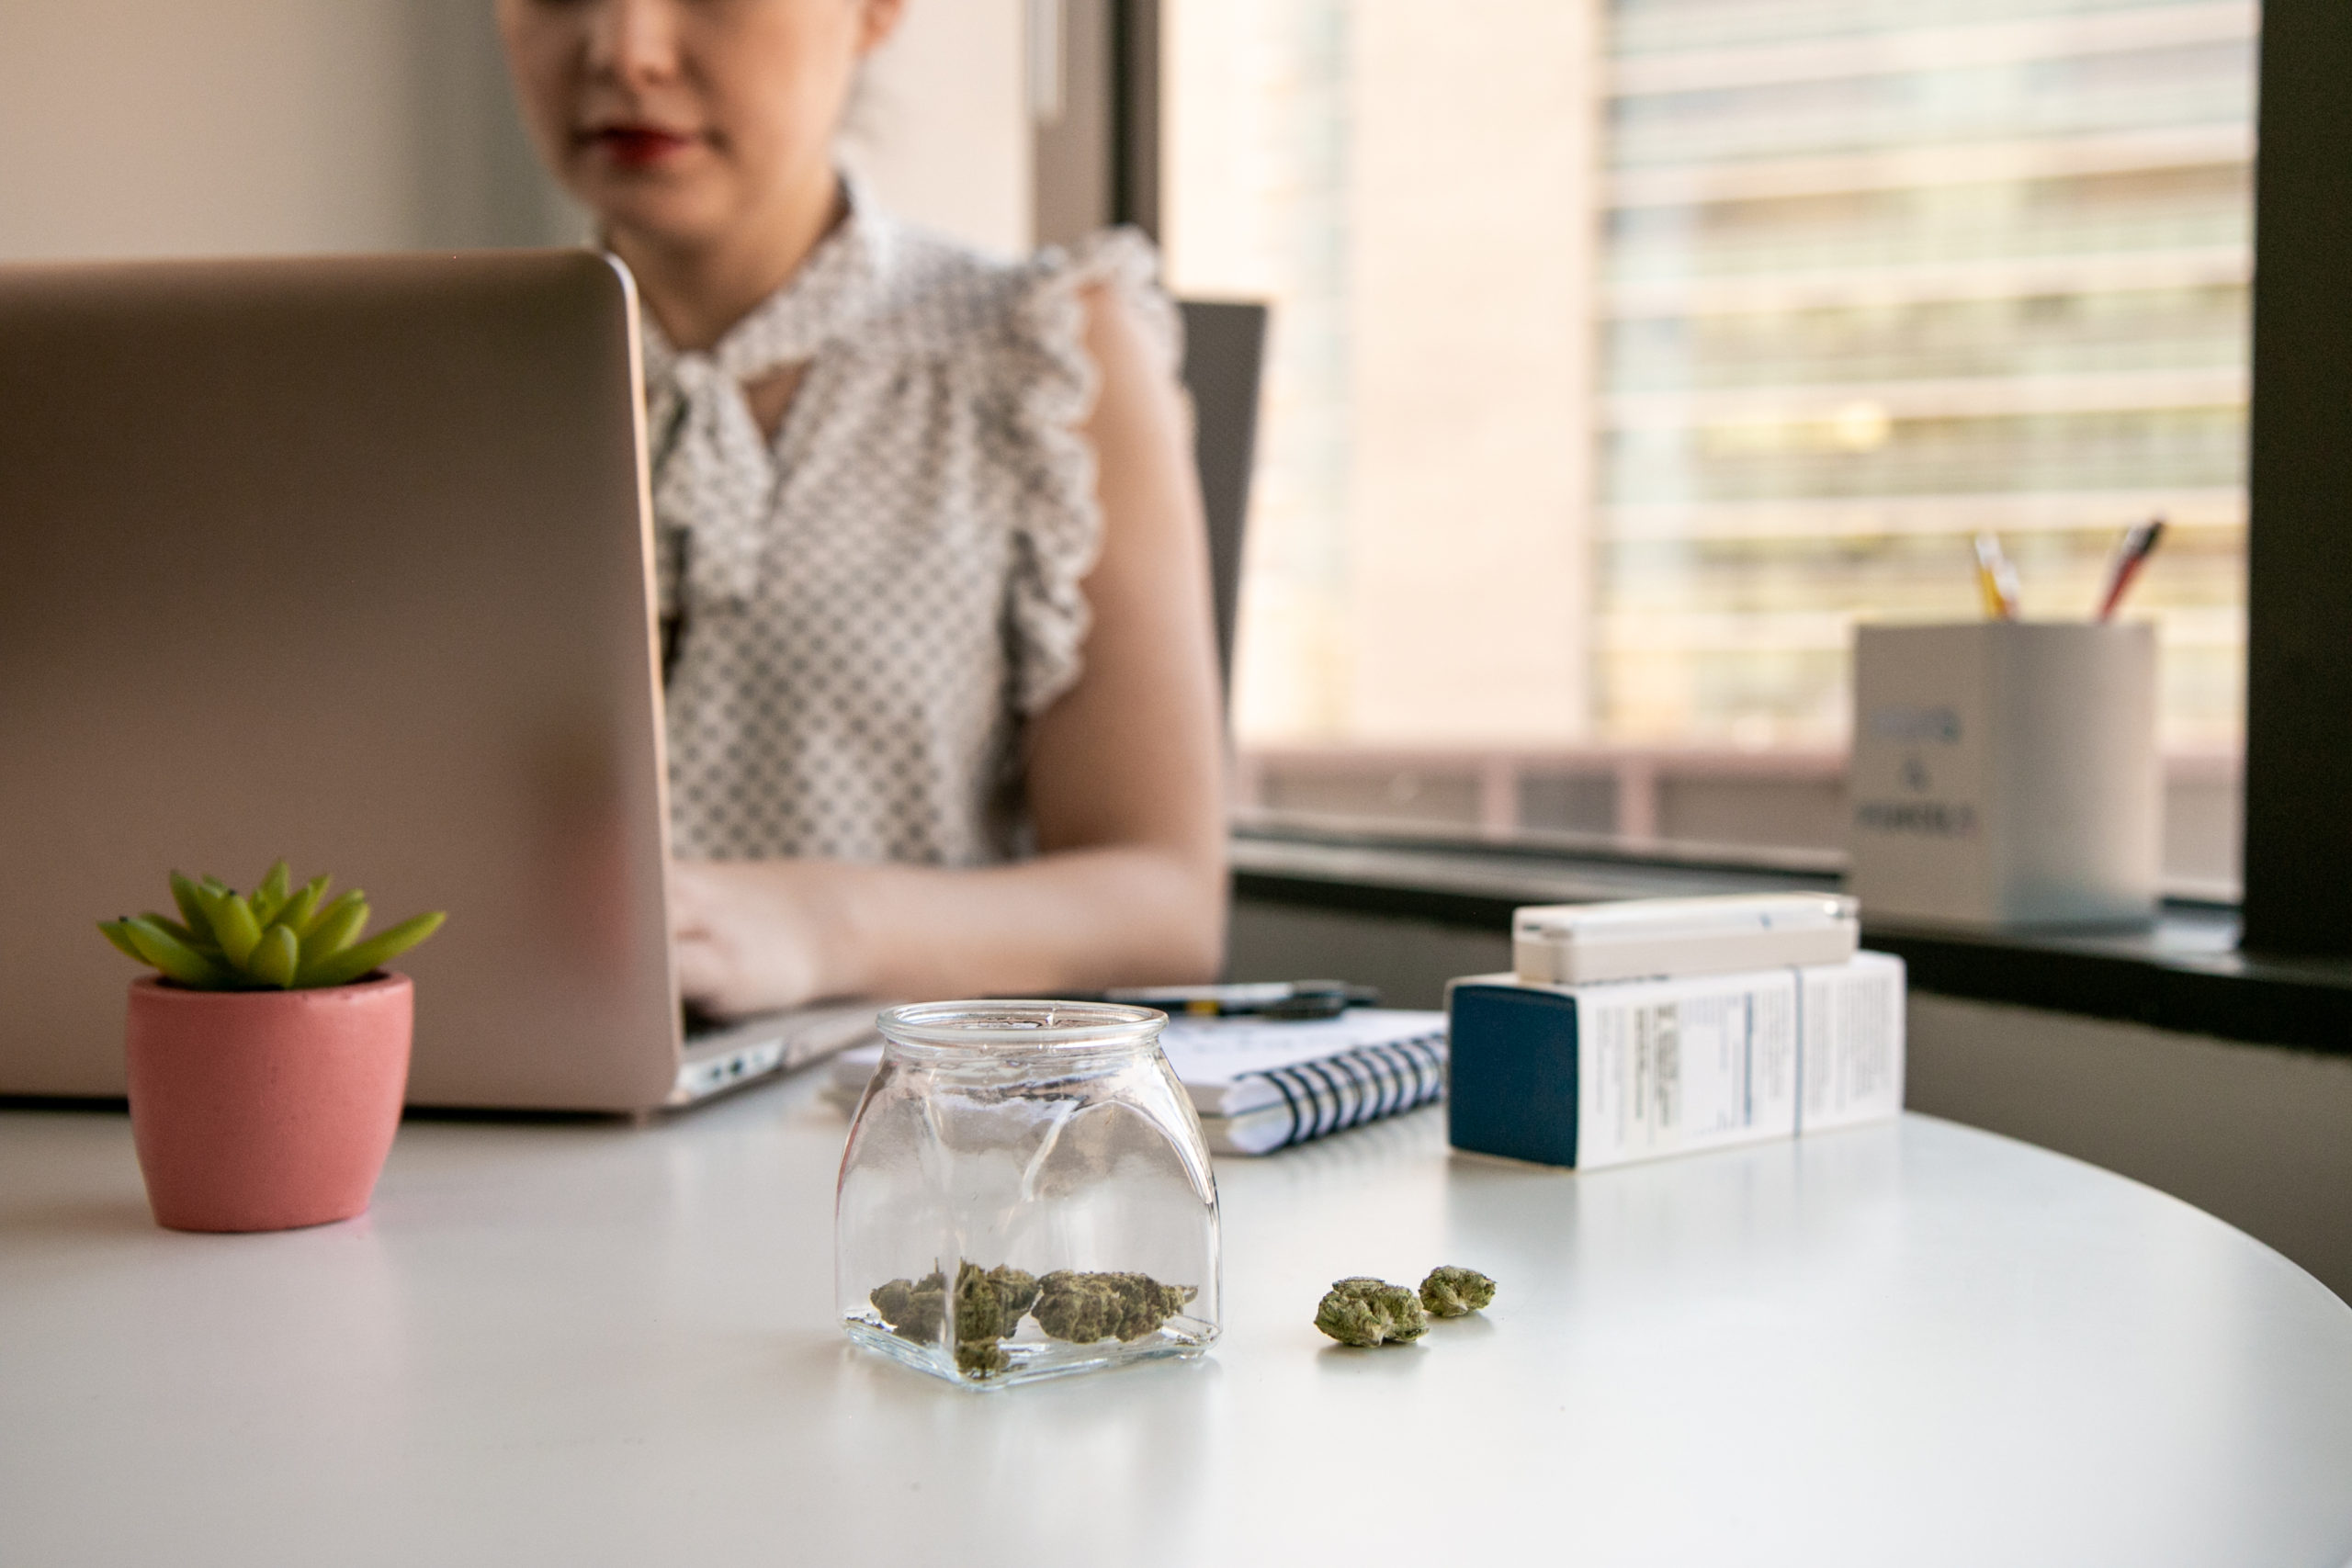 A glass jar of cannabis buds sit on a white office table in an office environment with a downtown view outside the window. A woman is working on a laptop computer with a vape pen by her side. A succulent in a pink pot adorns the desk.